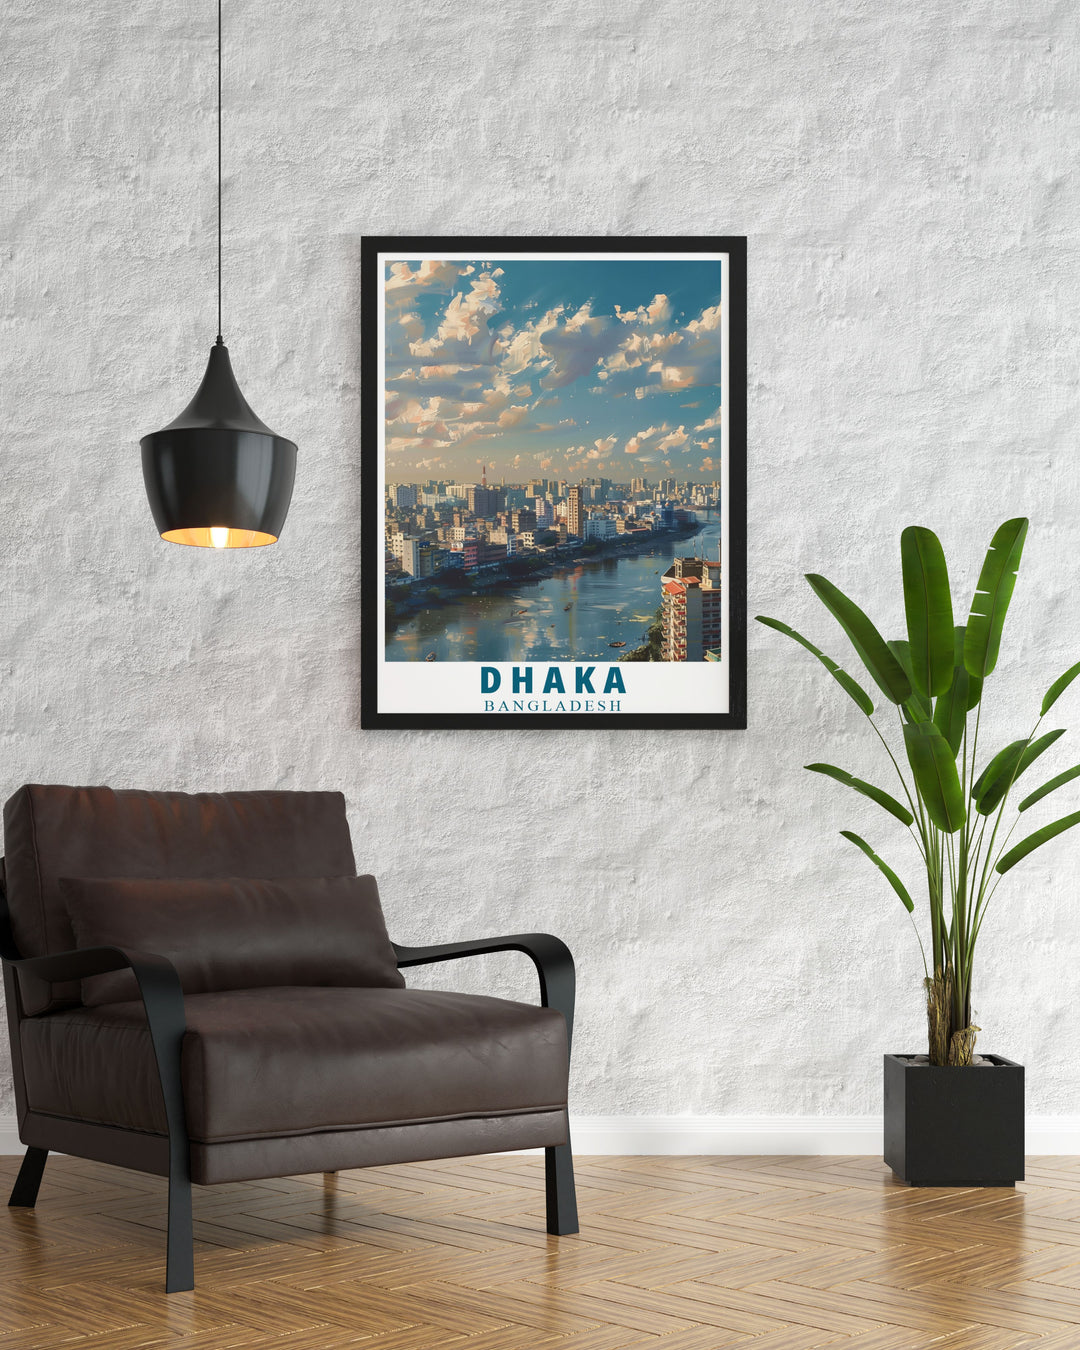 Stunning Dhaka Wall Art depicting the lively streets and iconic landmarks of the city. This Dhaka travel poster is a perfect addition to your home decor and makes an excellent gift for anyone who appreciates the beauty and energy of Dhaka.